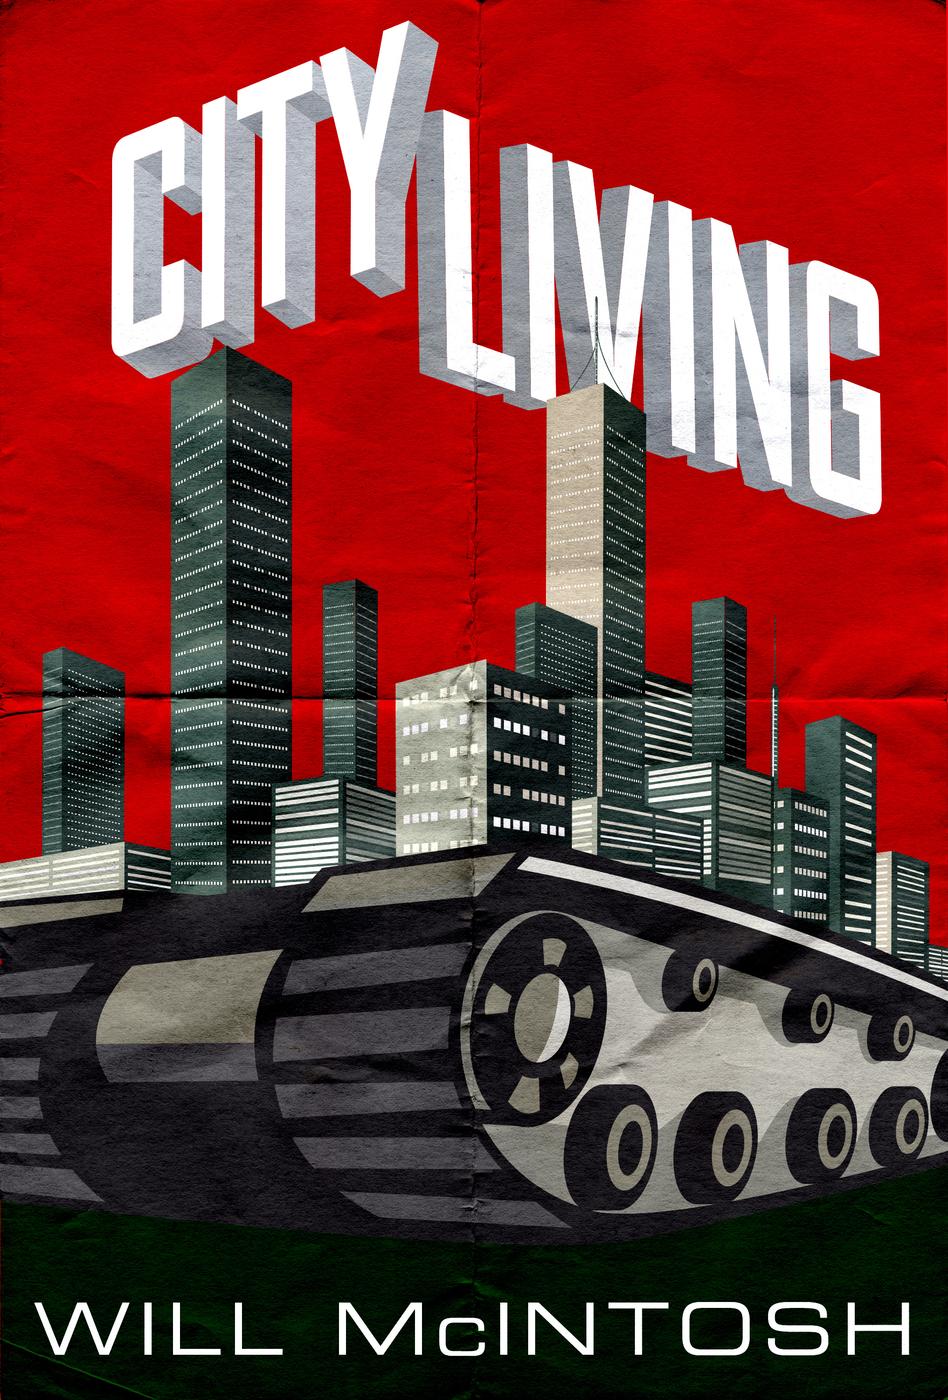 City Living (2015) by Will McIntosh